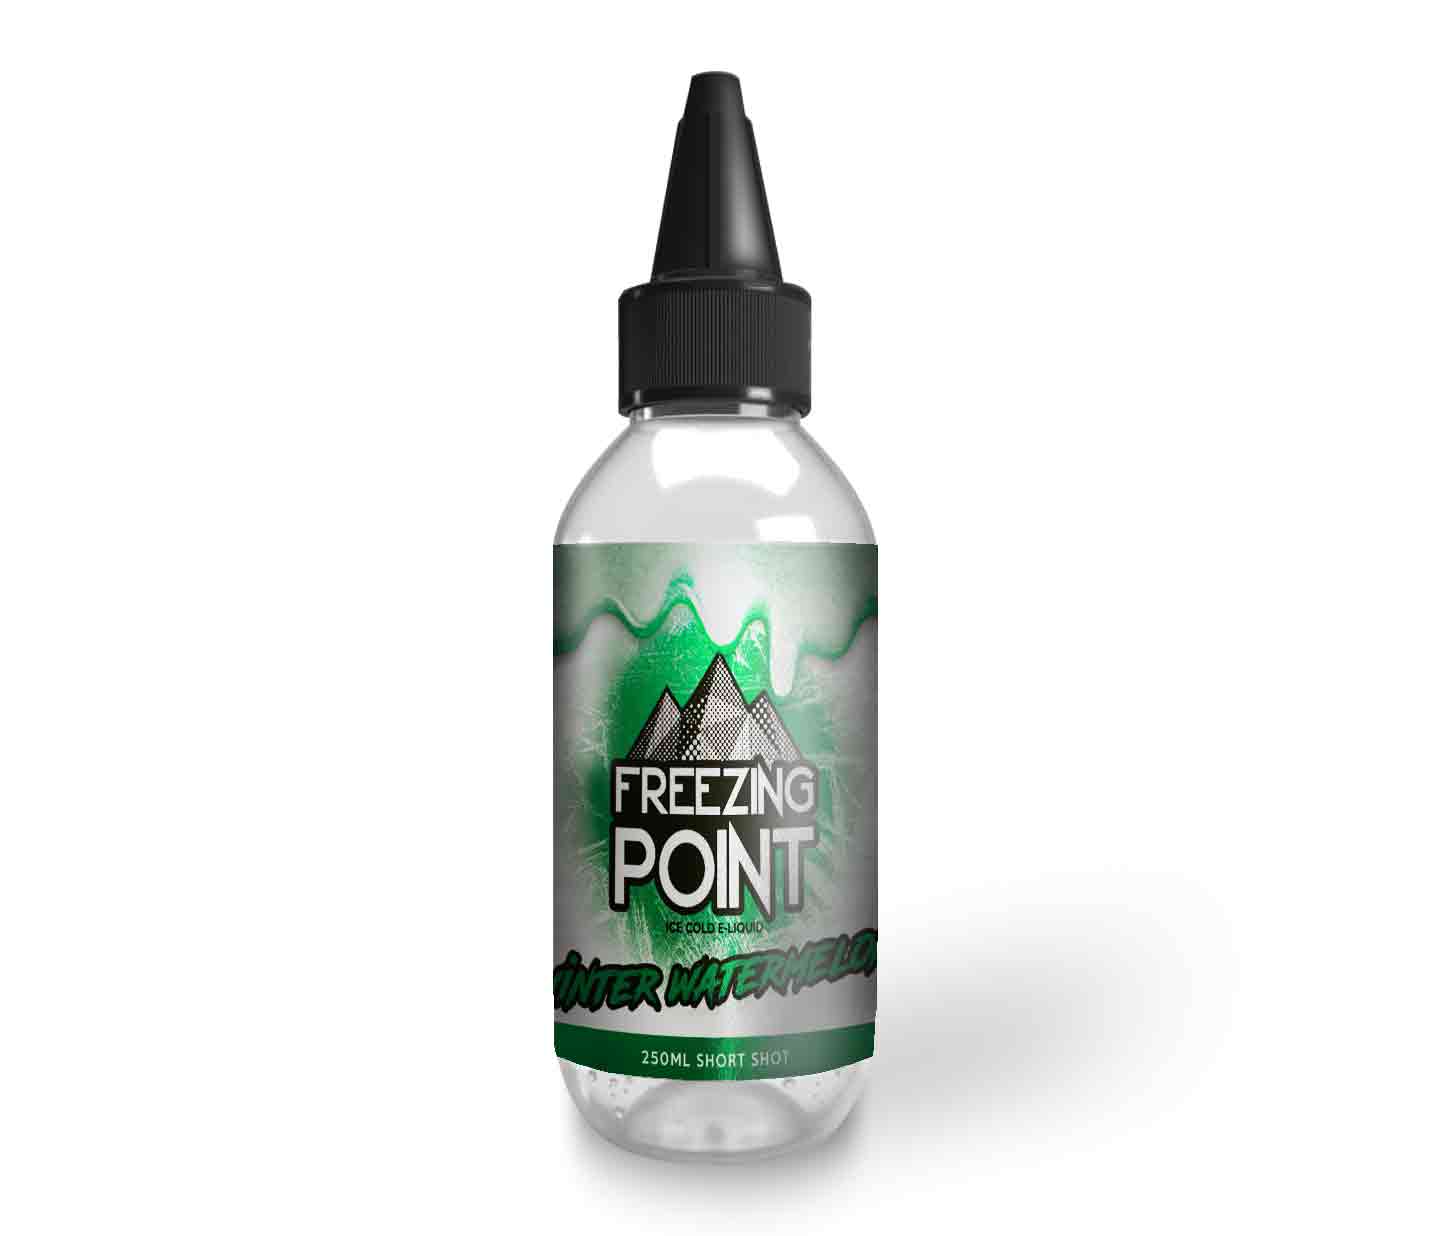 Winter Watermelon Flavour Shot by Freezing Point - 250ml